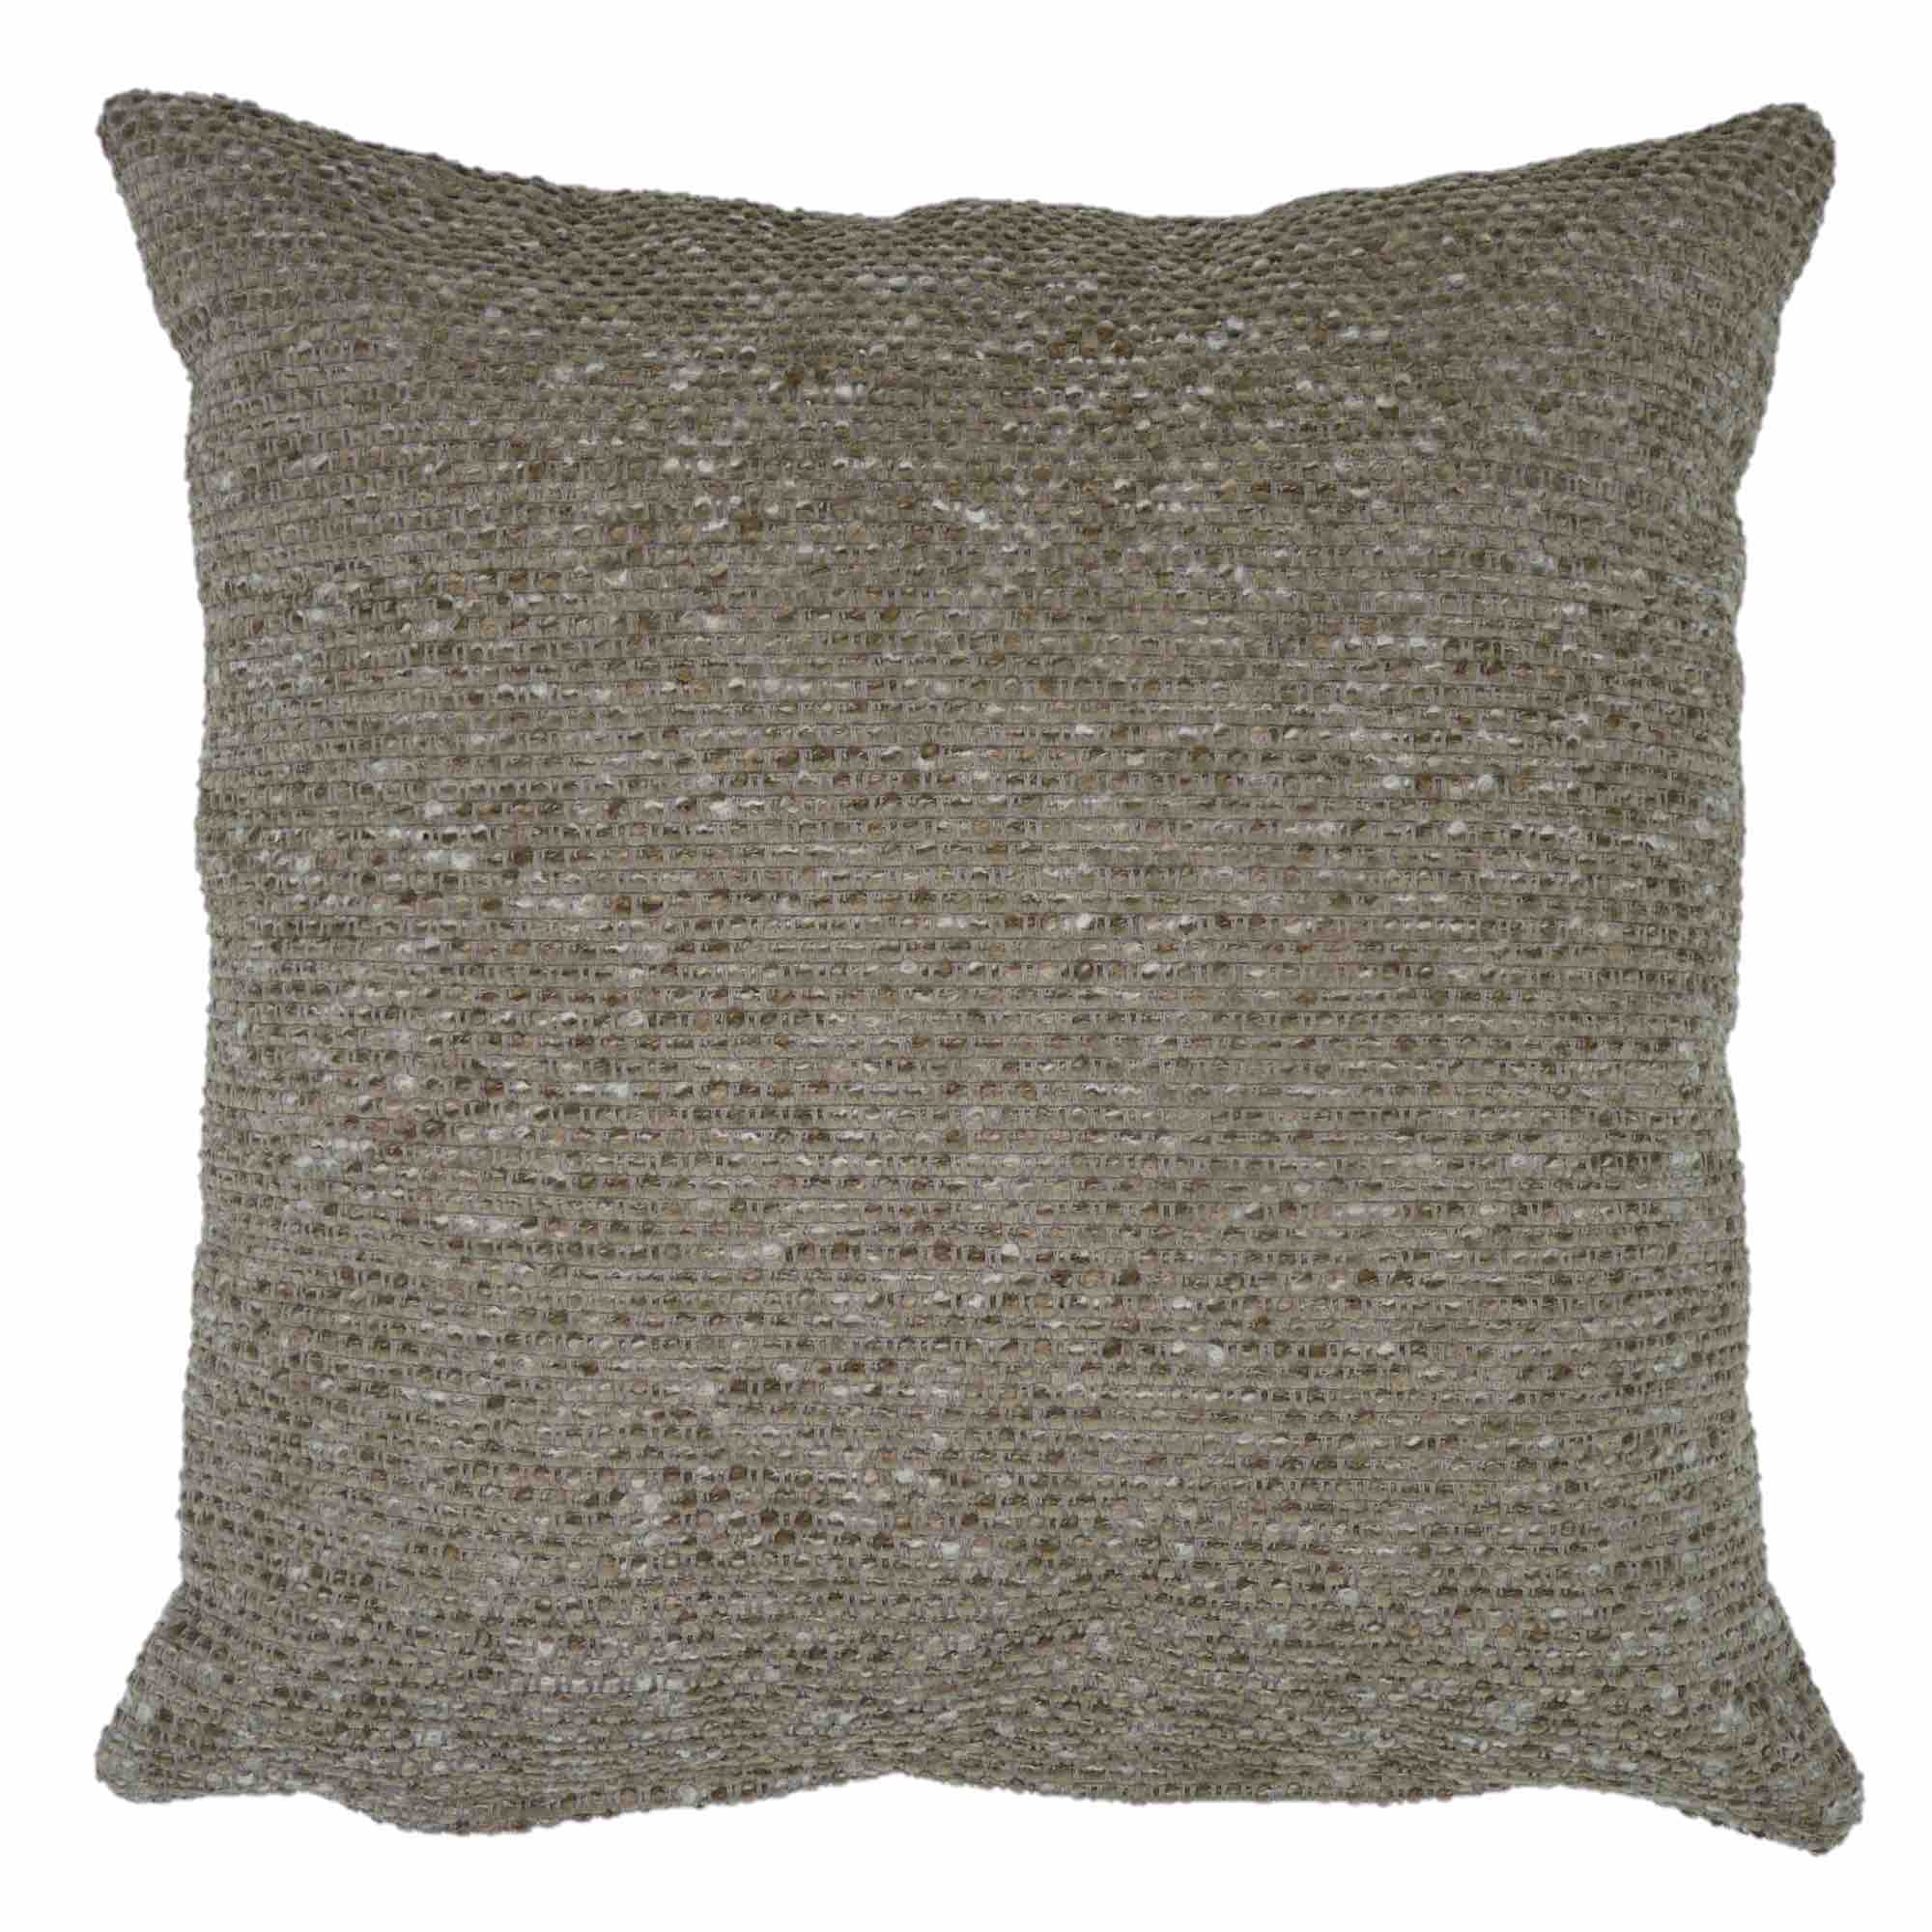 Elgin Woven Cushion Cover - Pigeon